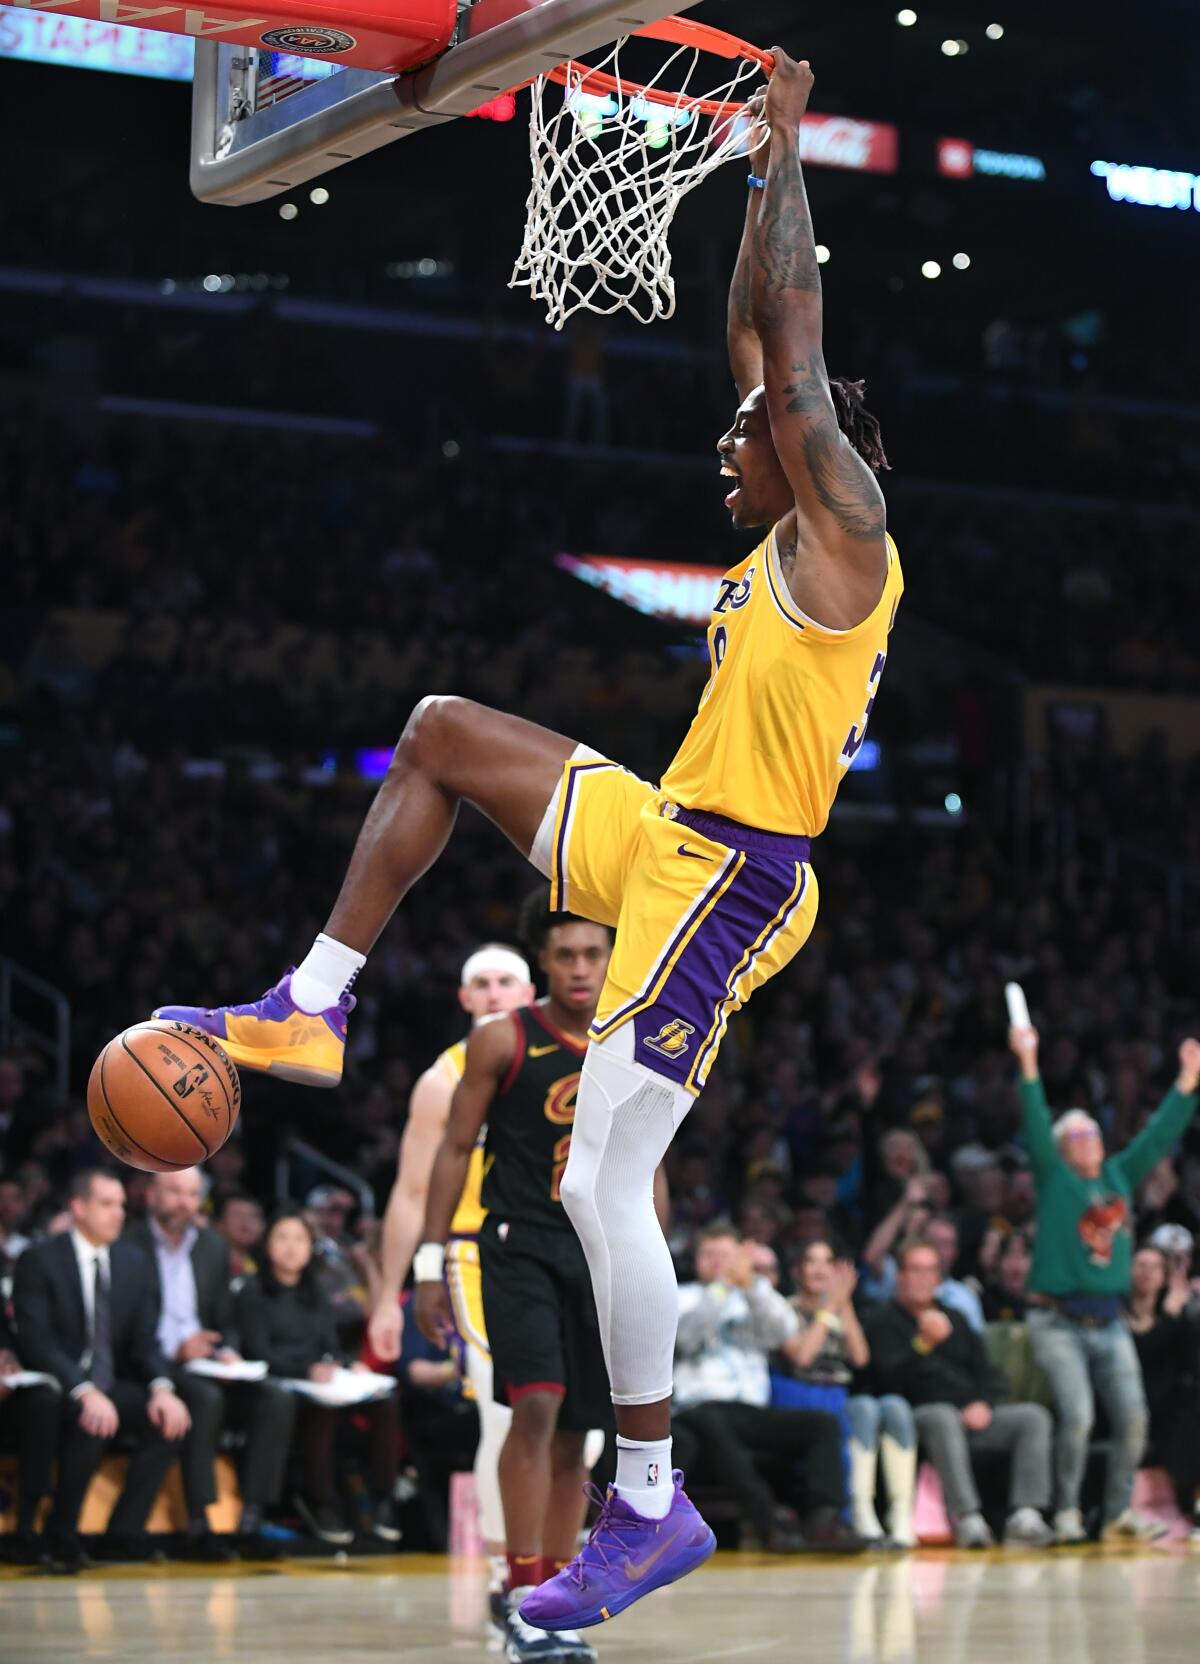 Dwight Howard dunks during the Lakers' win over the Cavaliers on Monday at Staples Center. He finished with season highs of 21 points and 15 rebounds.